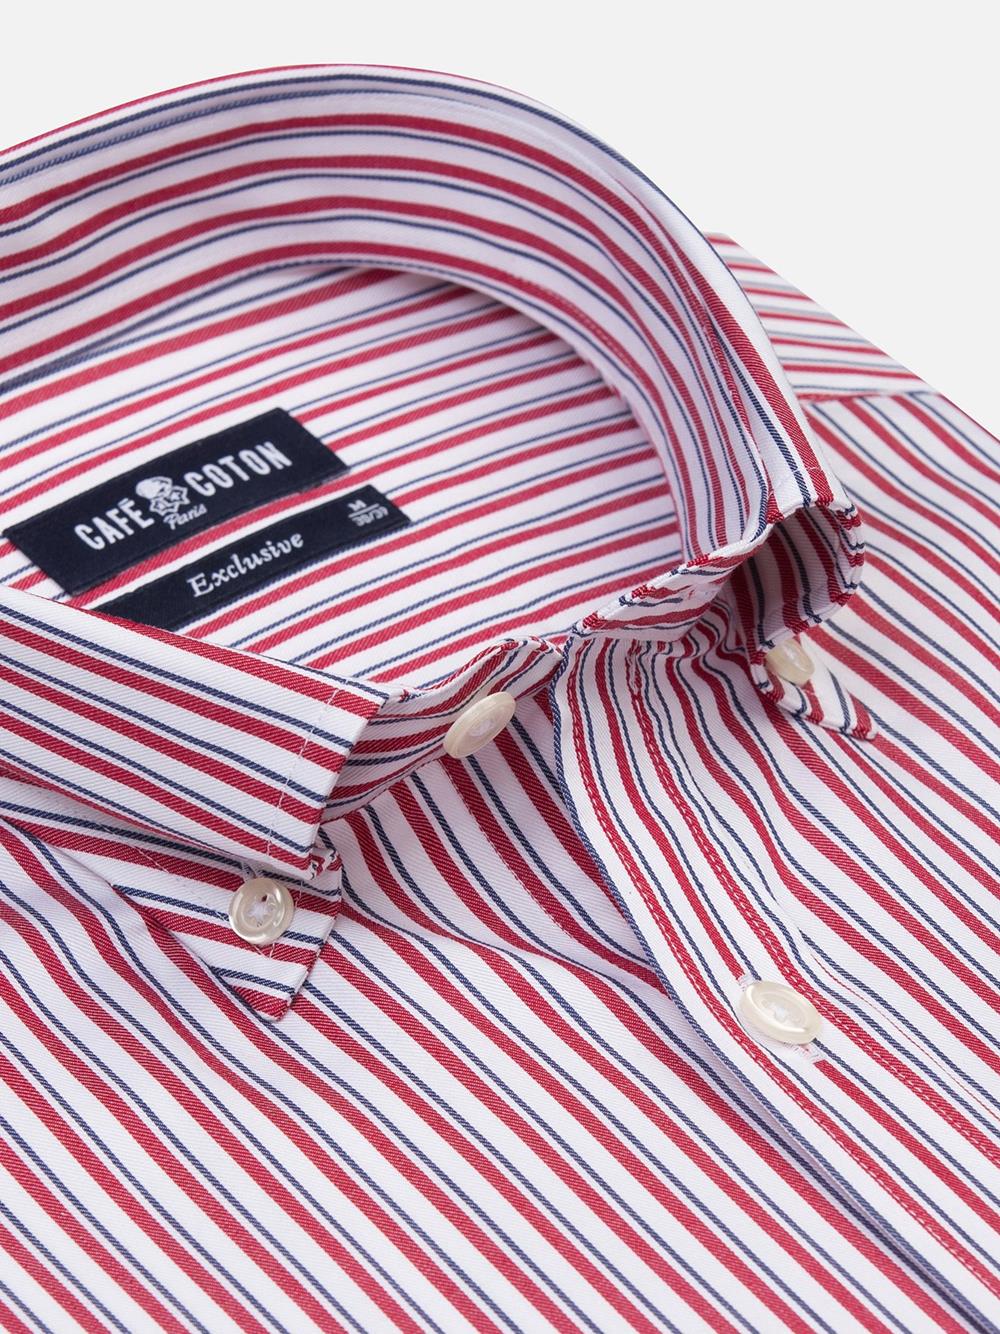 Stanley red striped shirt - Button-down collar